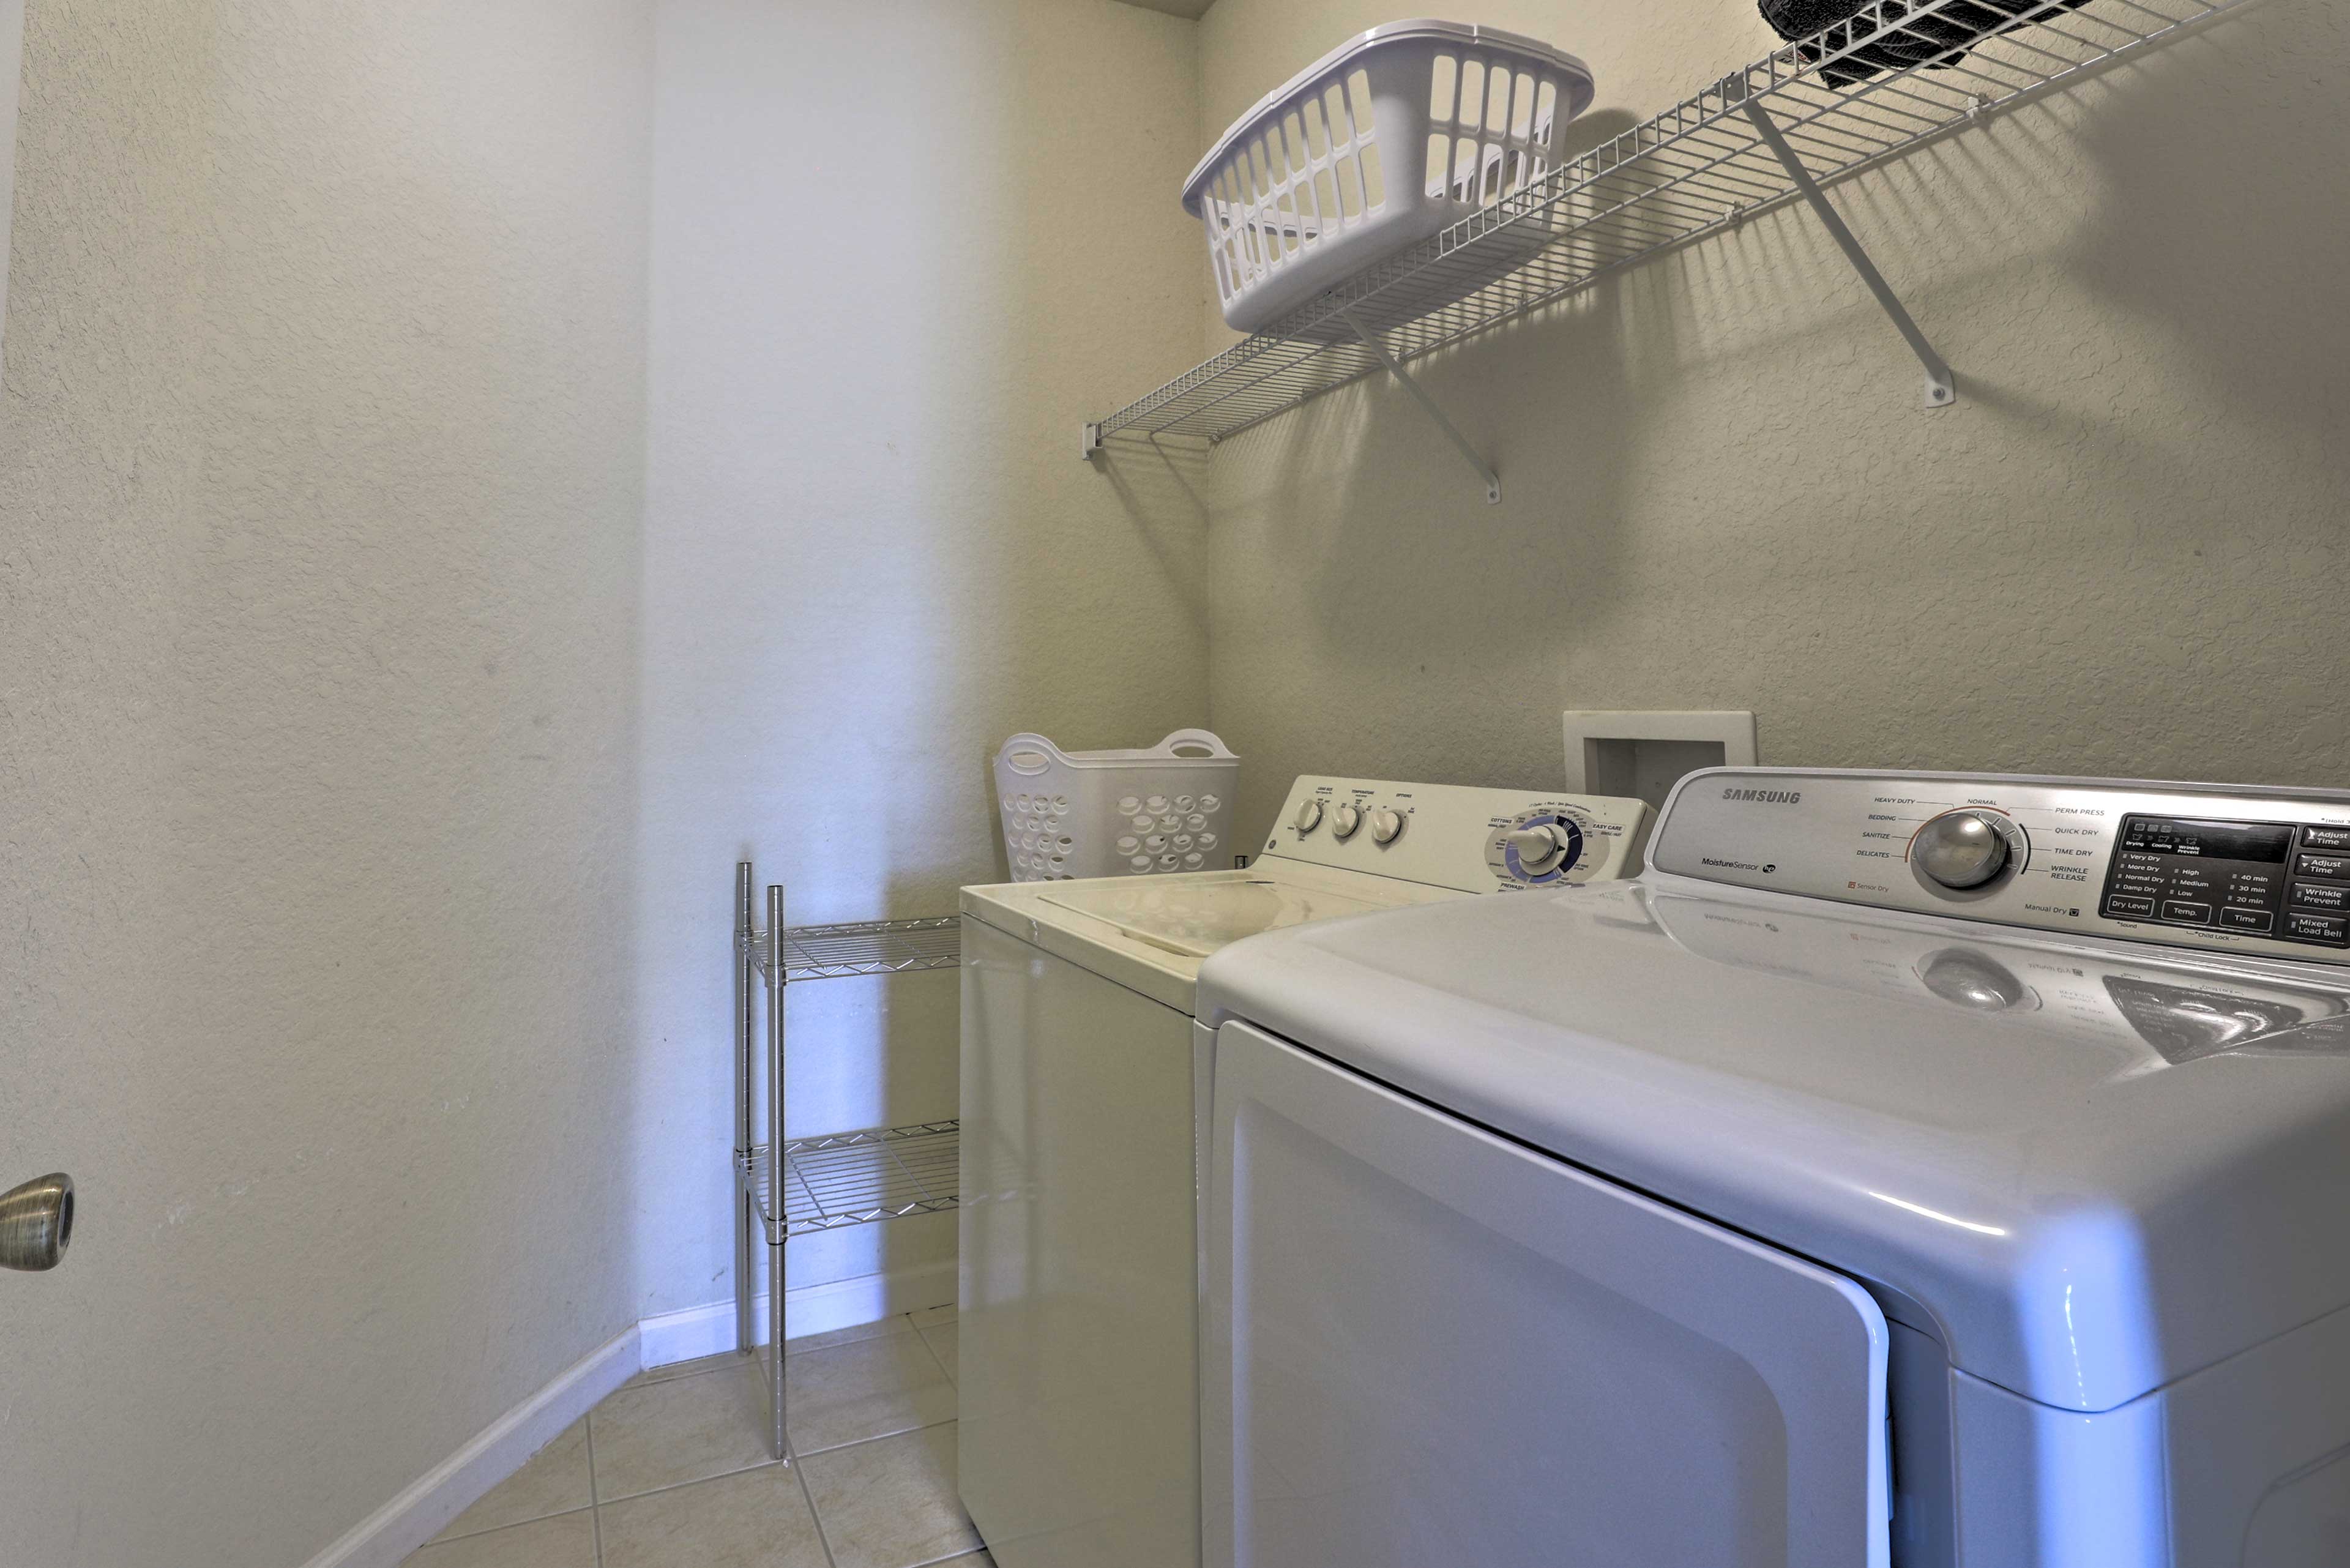 Keep your vacation clothes clean with the washer and dryer.